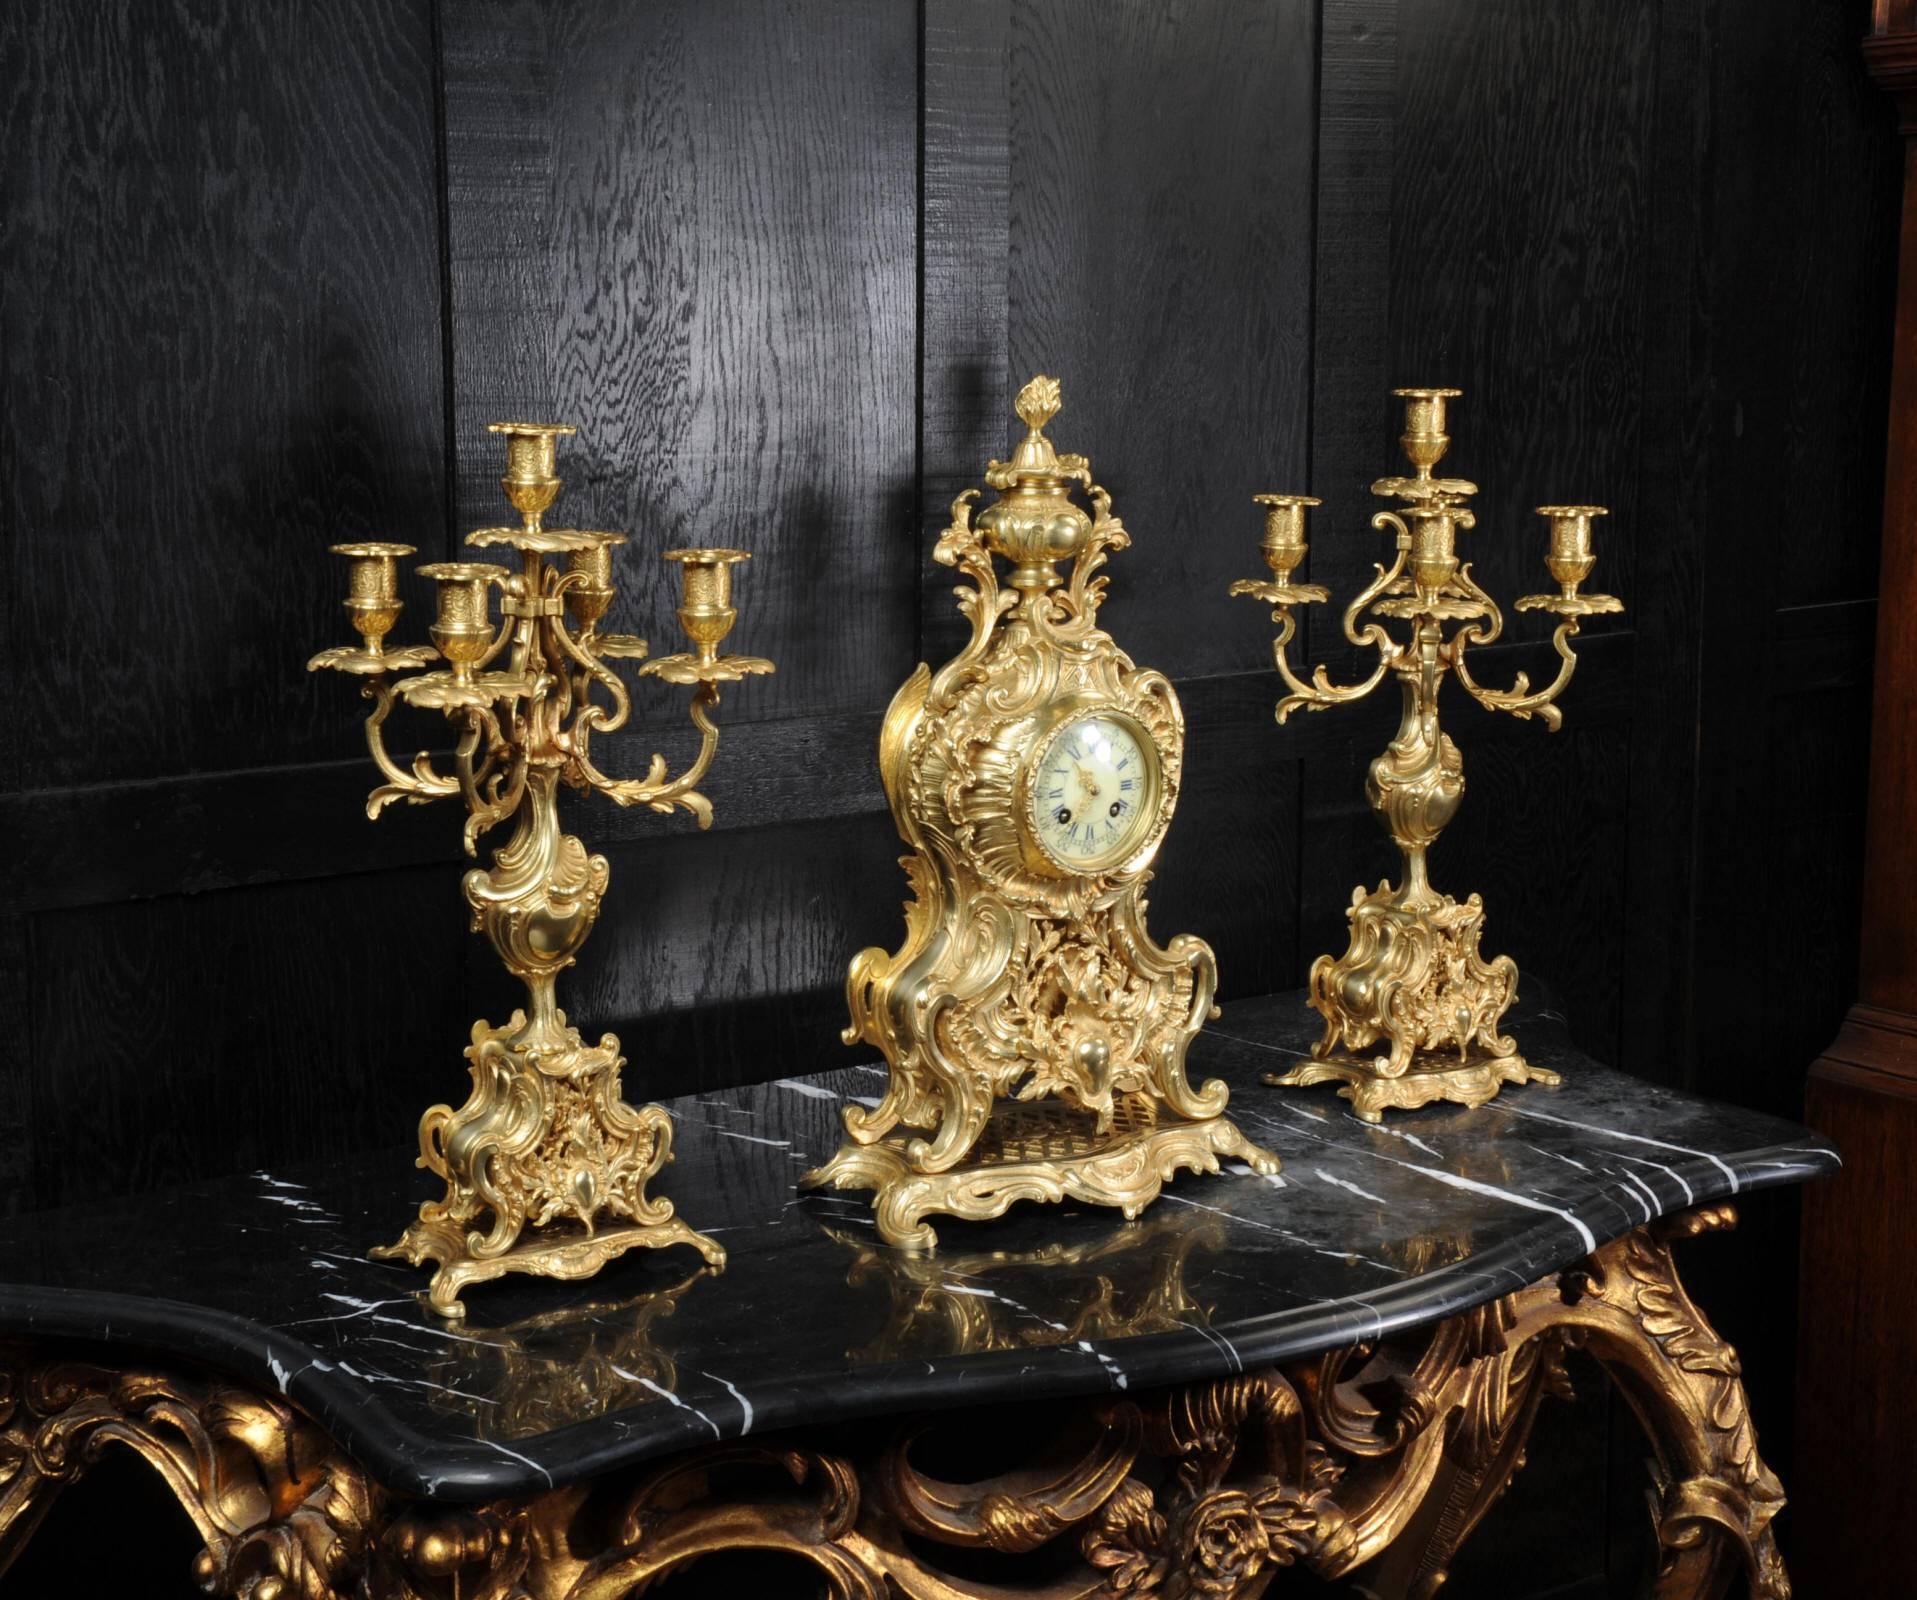 A large and stunning original antique French clock set, beautifully modelled in gilt bronze in the Rococo style. If is profusely decorated with 'C' scrolls and acanthus, the front is fretted to allow a glimpse of the pendulum swinging within.